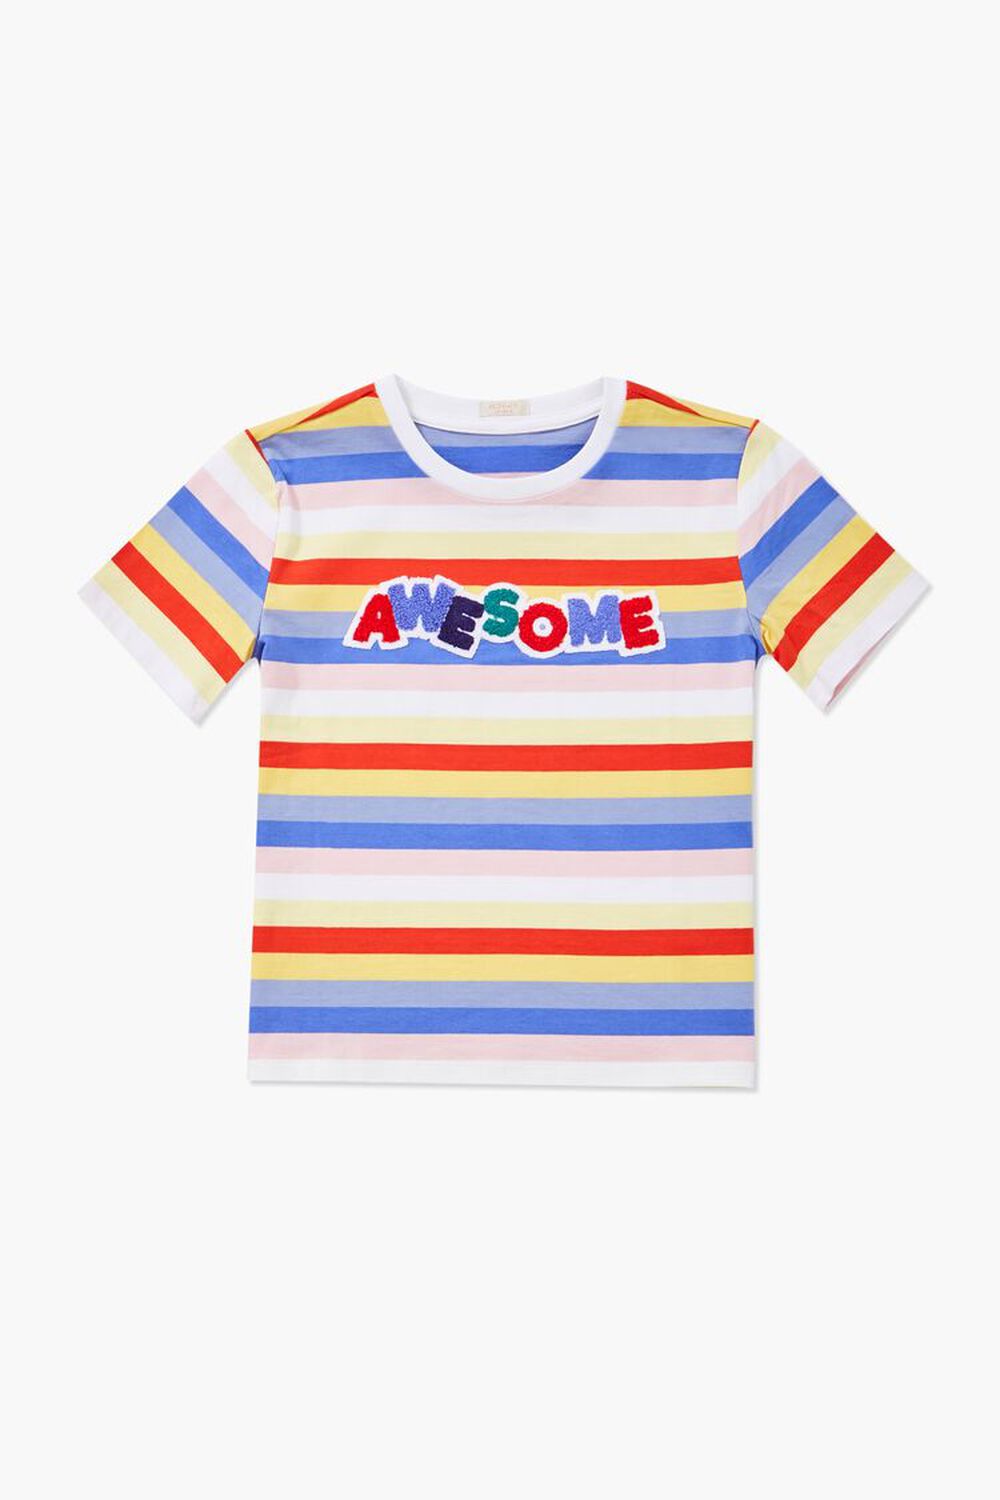 CREAM/MULTI Girls Awesome Graphic Striped Tee (Kids), image 1